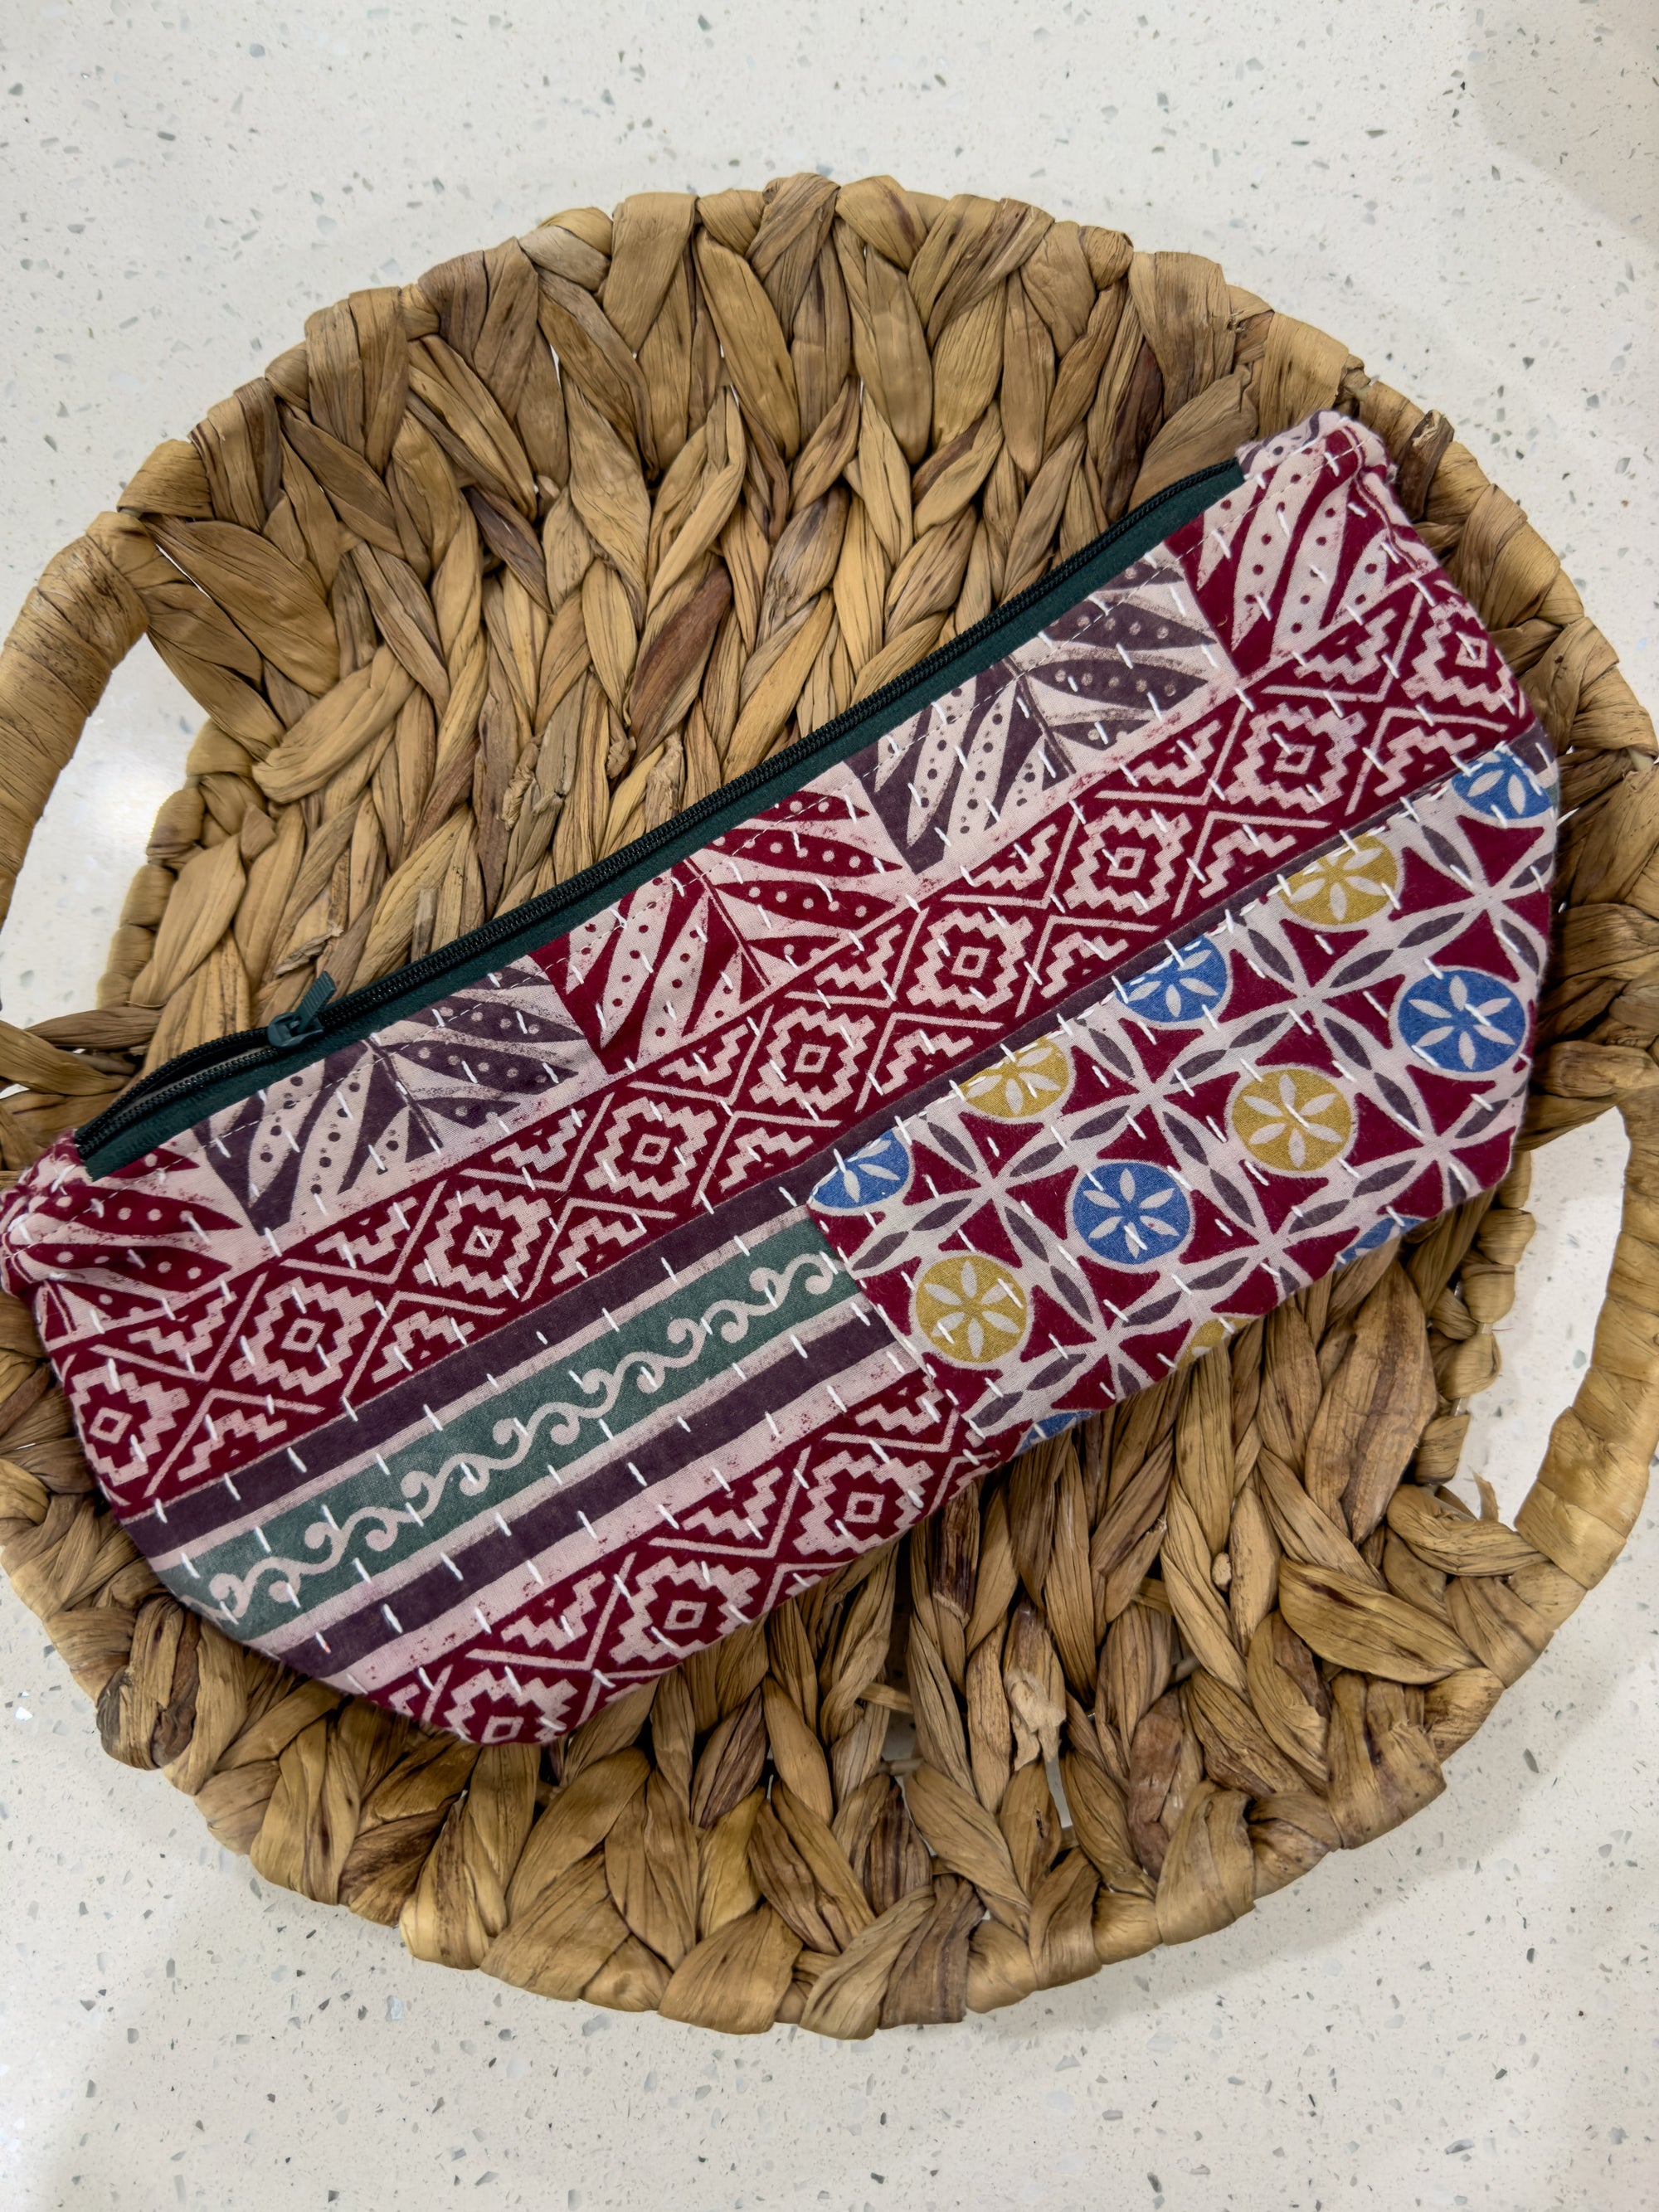 a woven basket with a red, white, and blue purse on top of it